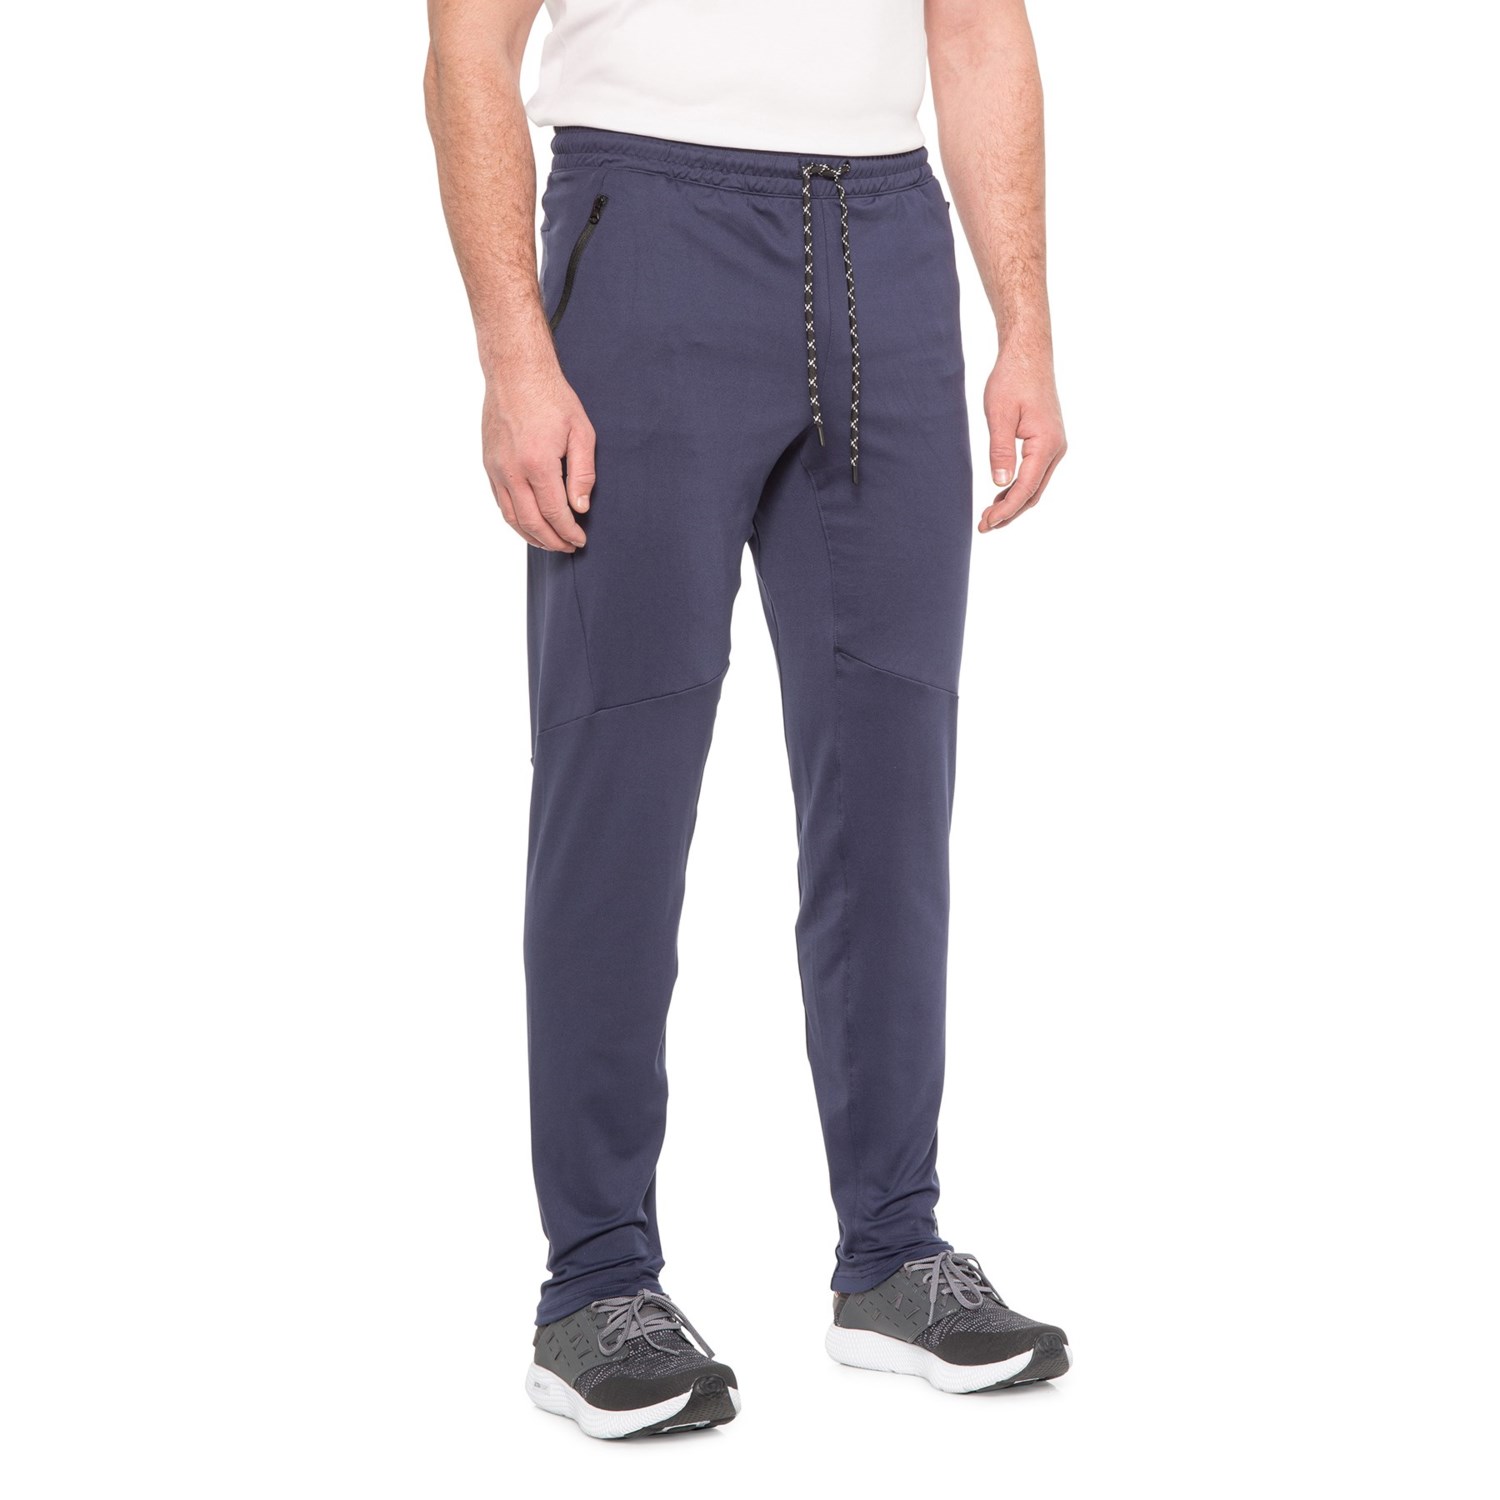 Balance Collection Duration Brushed Interlock Joggers (For Men) - Save 56%